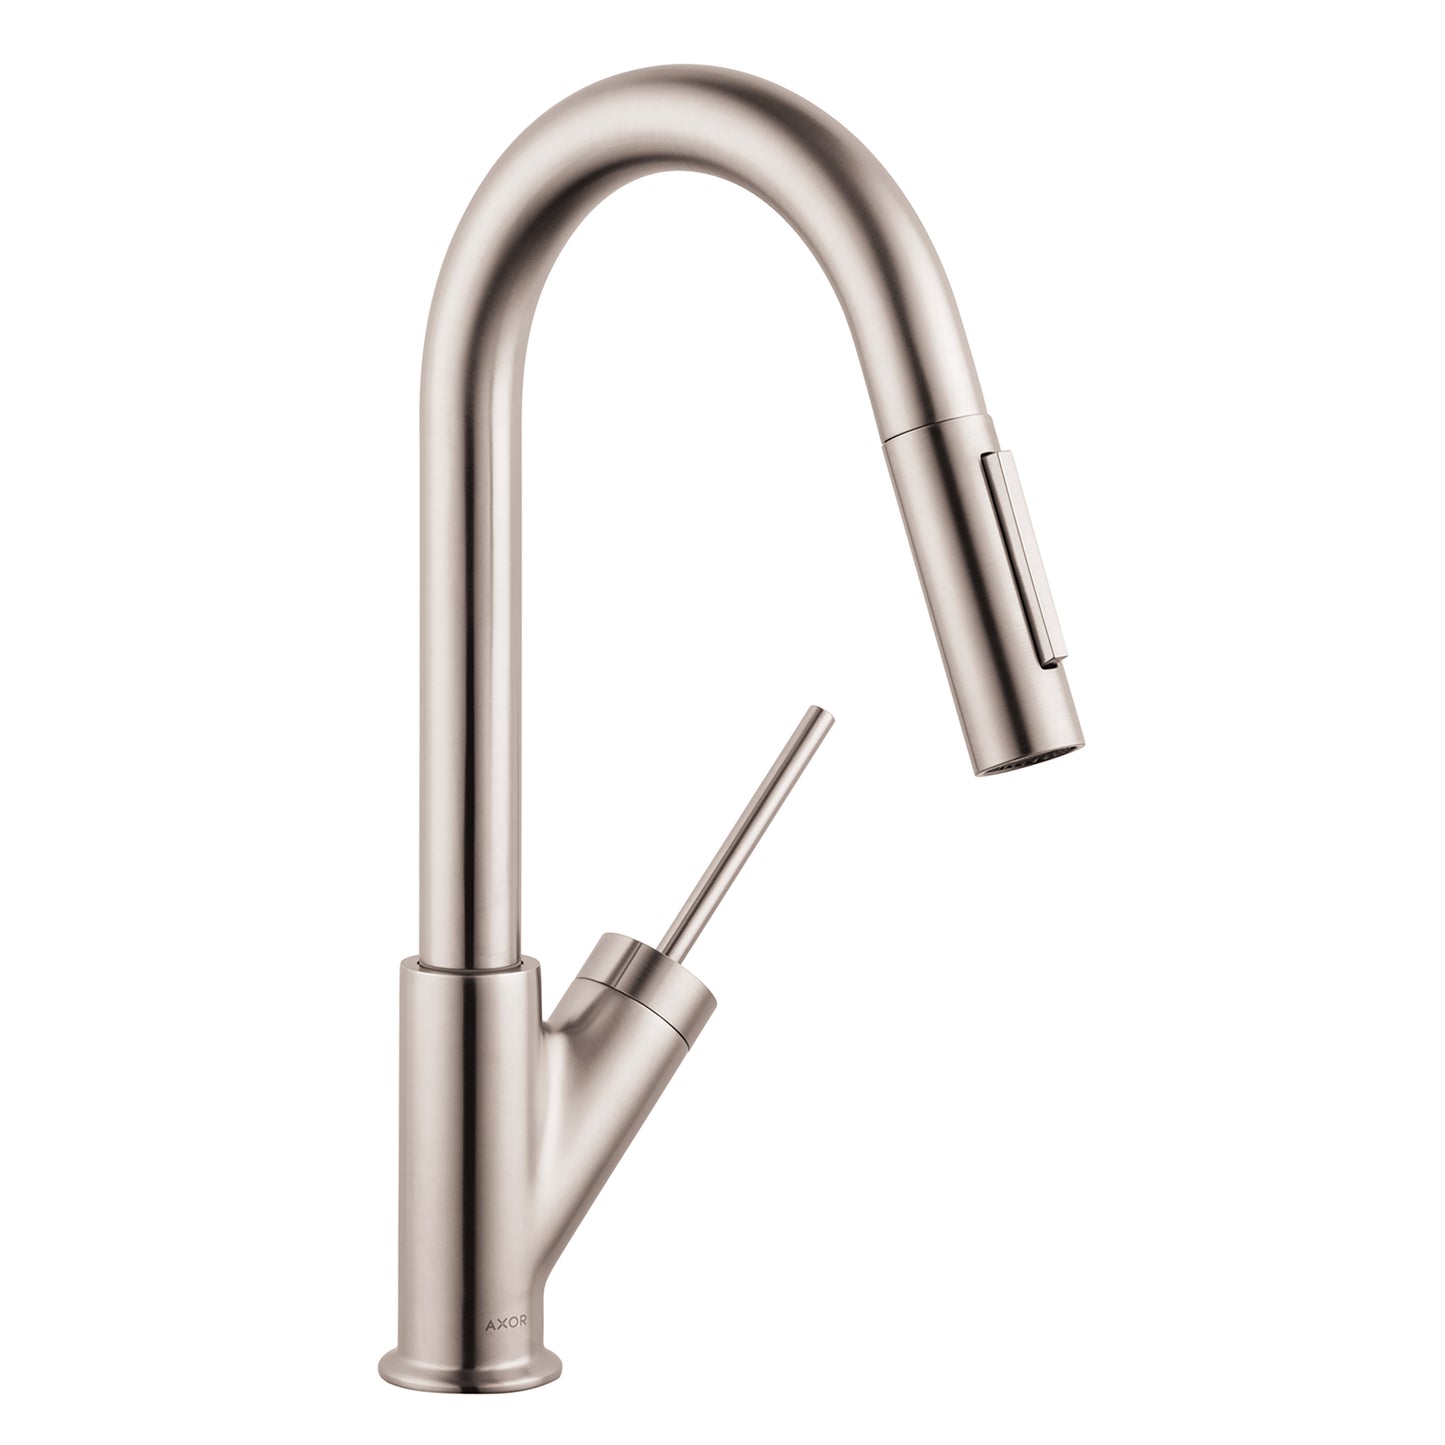 AXOR 10824801 Stainless Steel Optic Starck Modern Kitchen Faucet 1.75 GPM